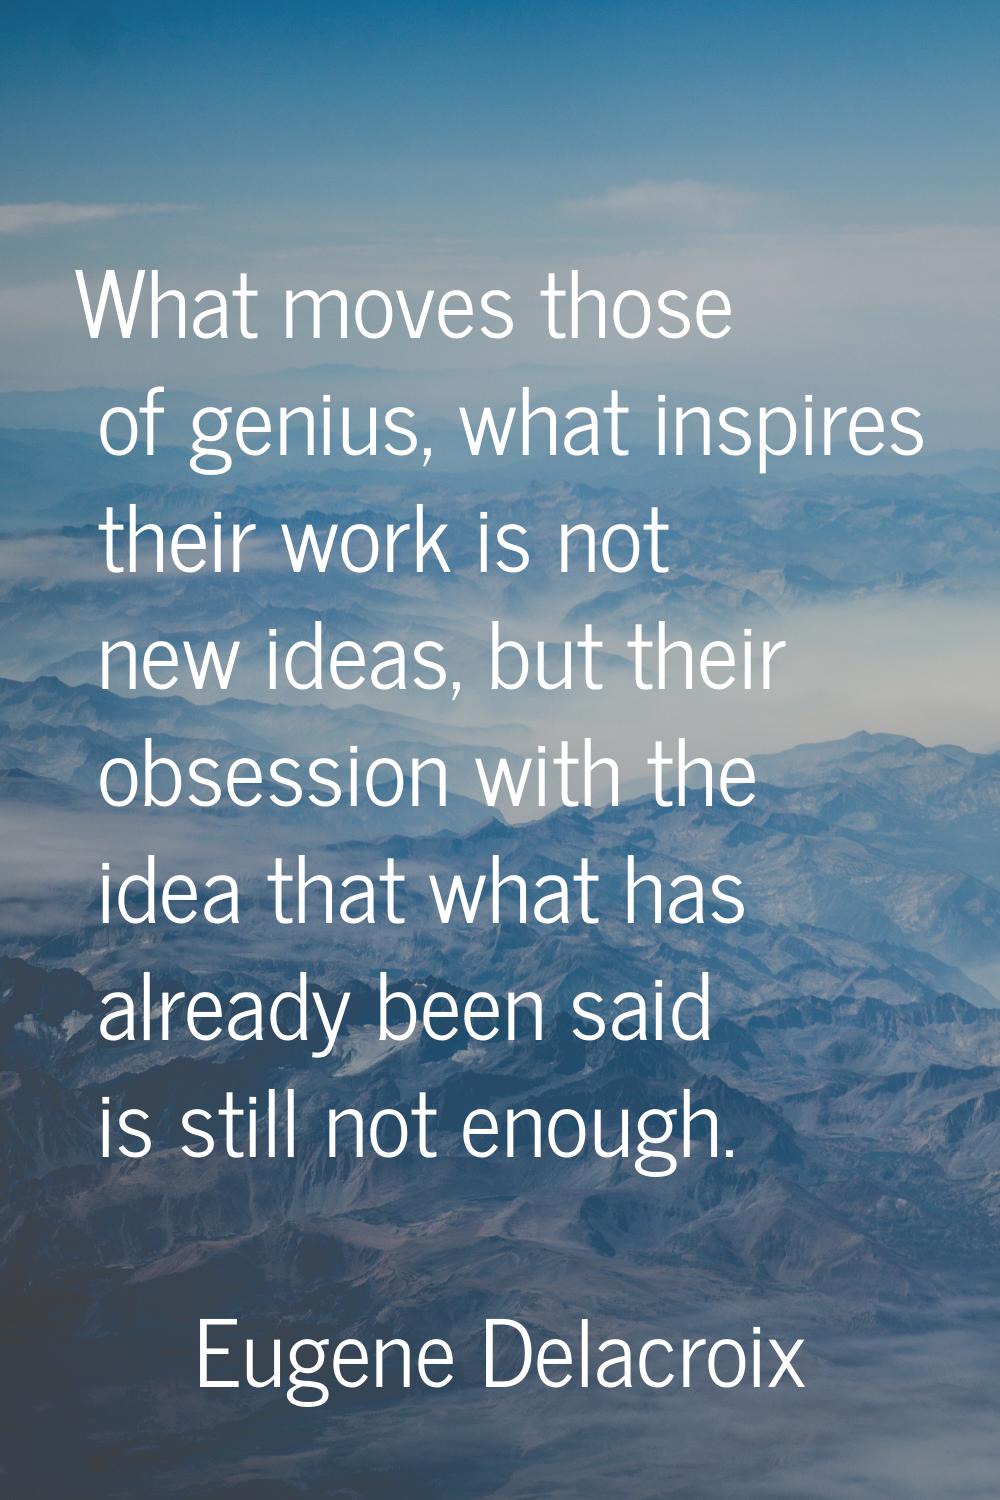 What moves those of genius, what inspires their work is not new ideas, but their obsession with the